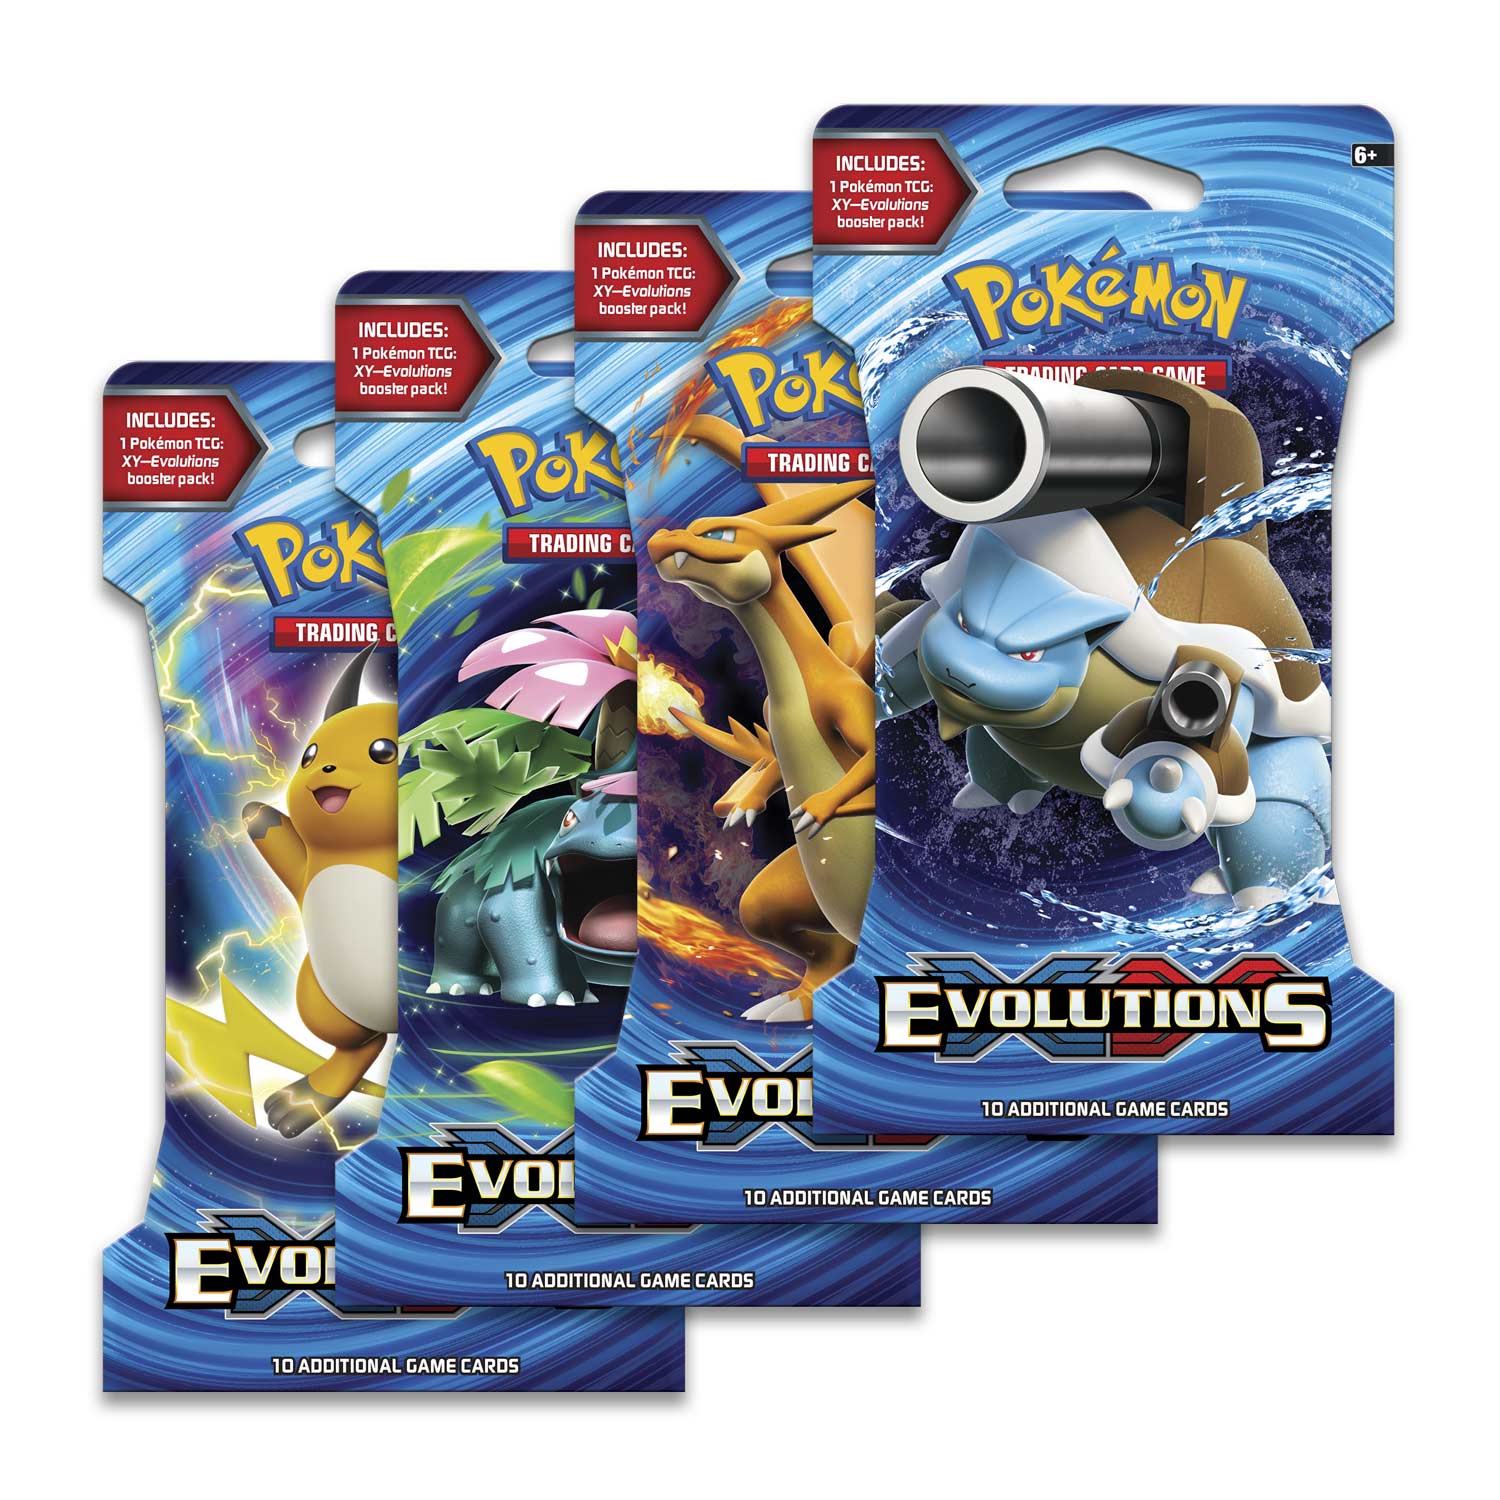 Pokémon XY Evolutions Booster Trading Card Game for sale online 